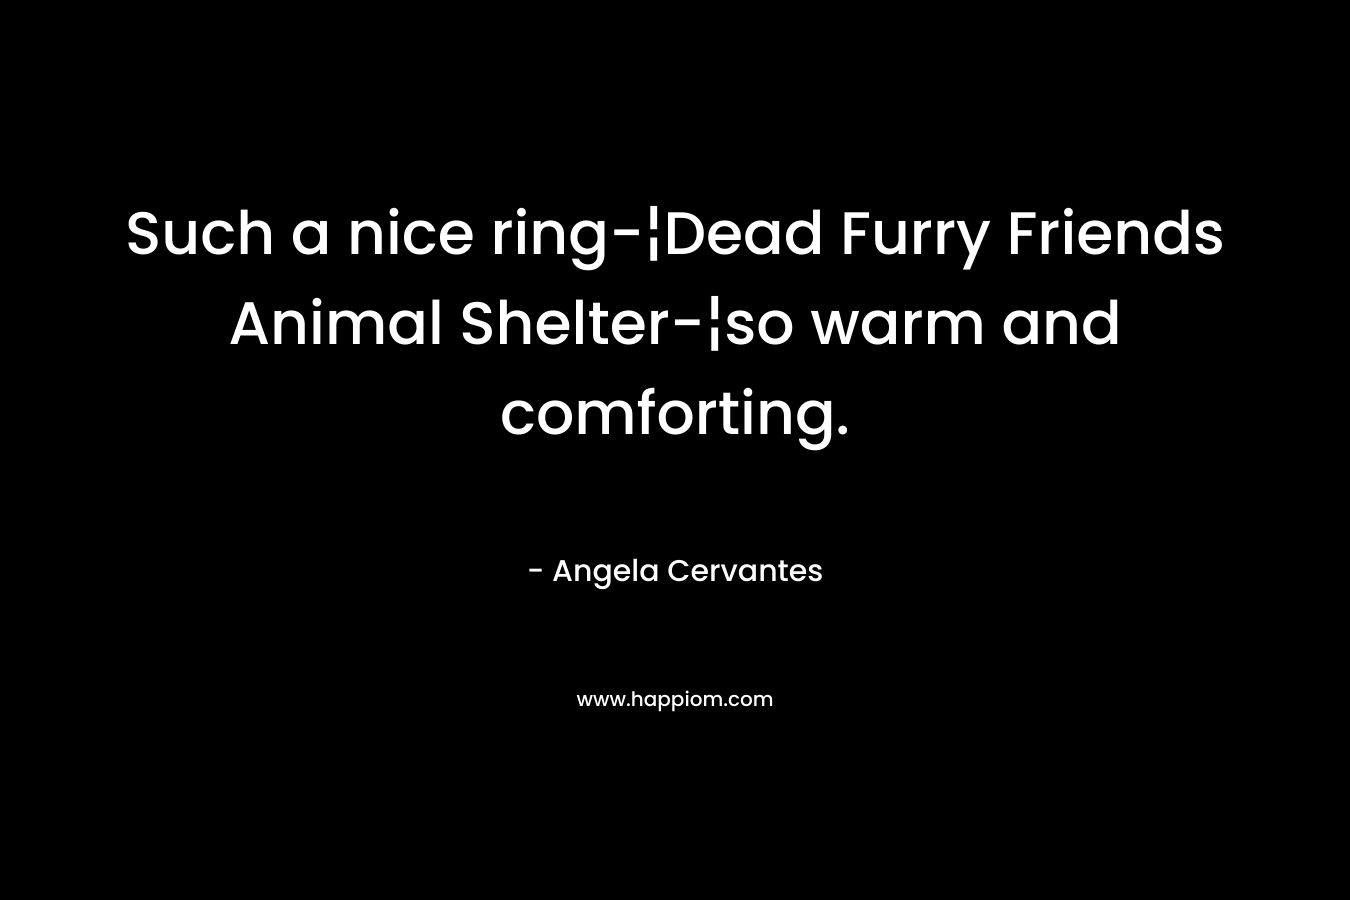 Such a nice ring-¦Dead Furry Friends Animal Shelter-¦so warm and comforting.